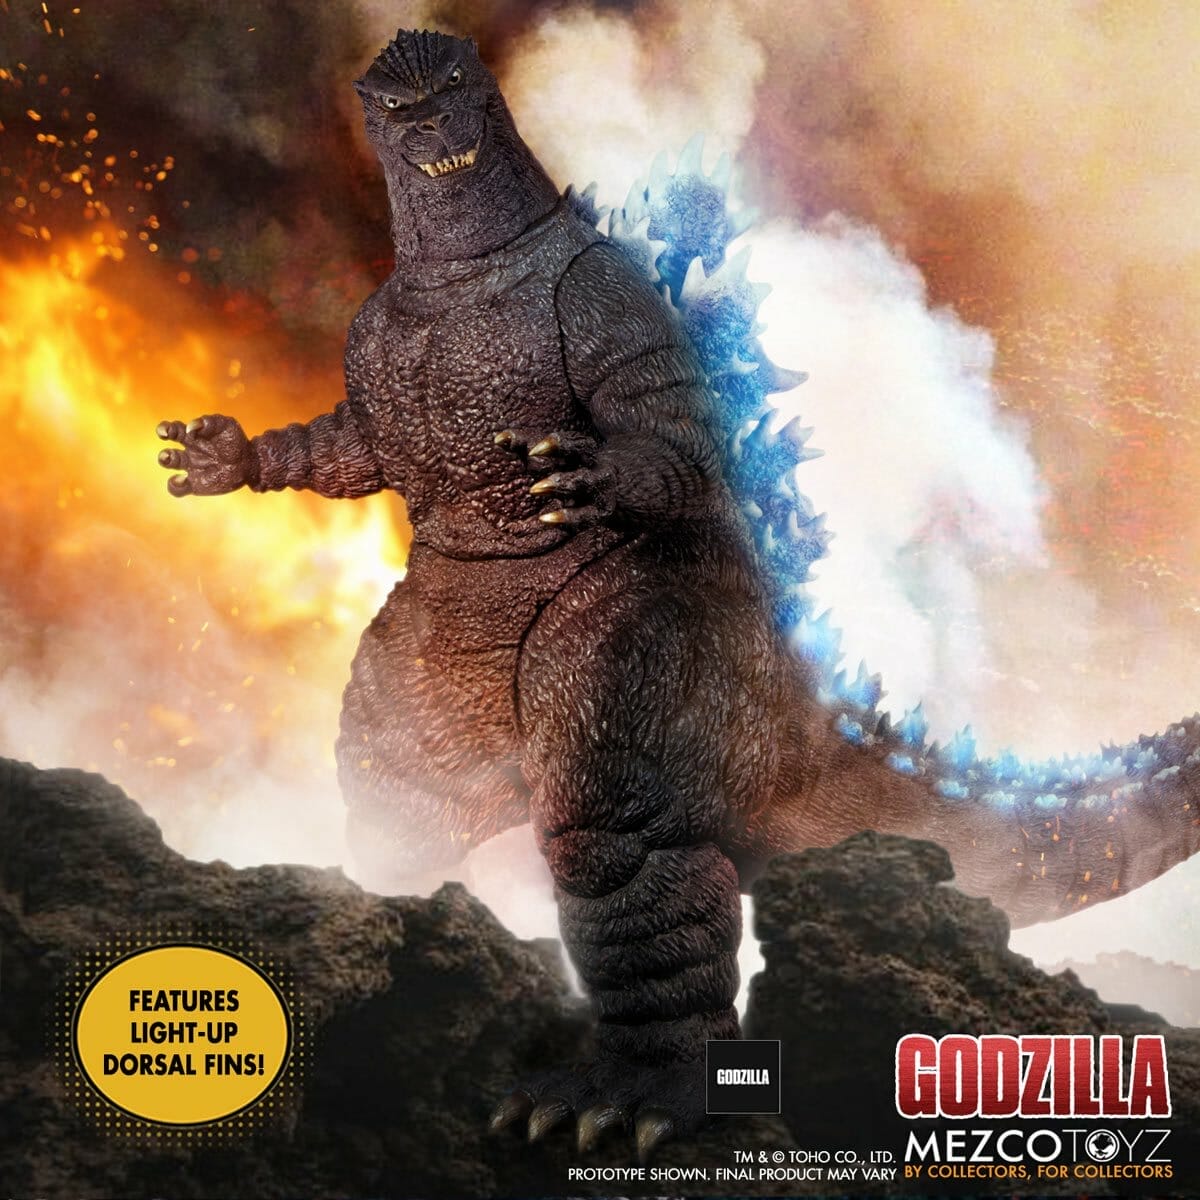 This towering Godzilla lights up with radioactive fire